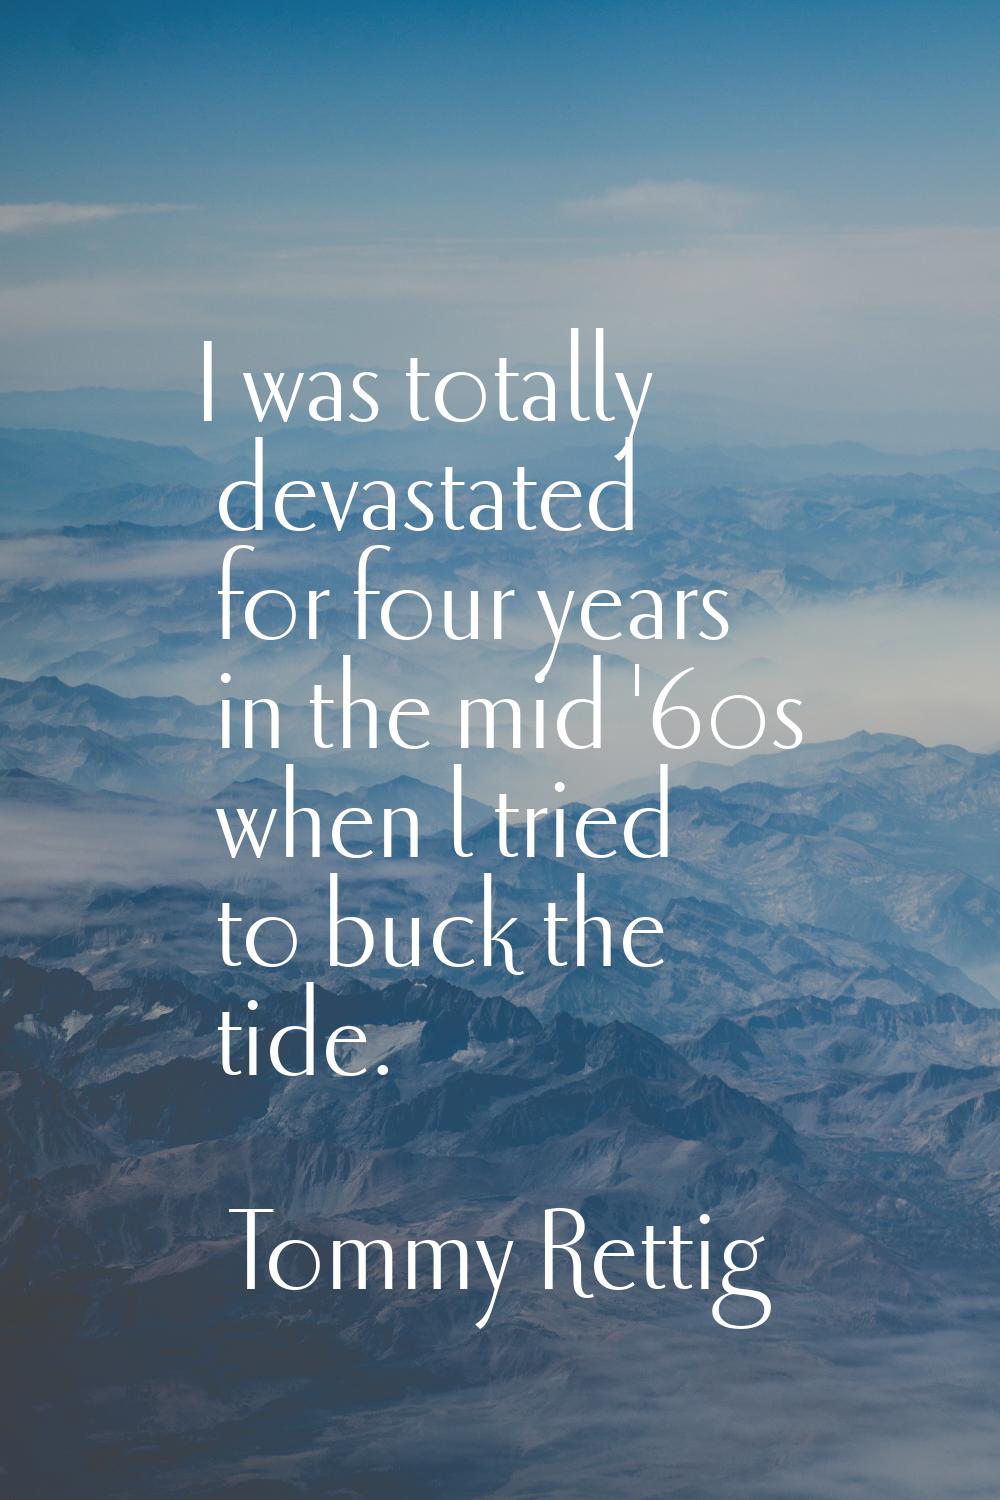 I was totally devastated for four years in the mid '60s when l tried to buck the tide.